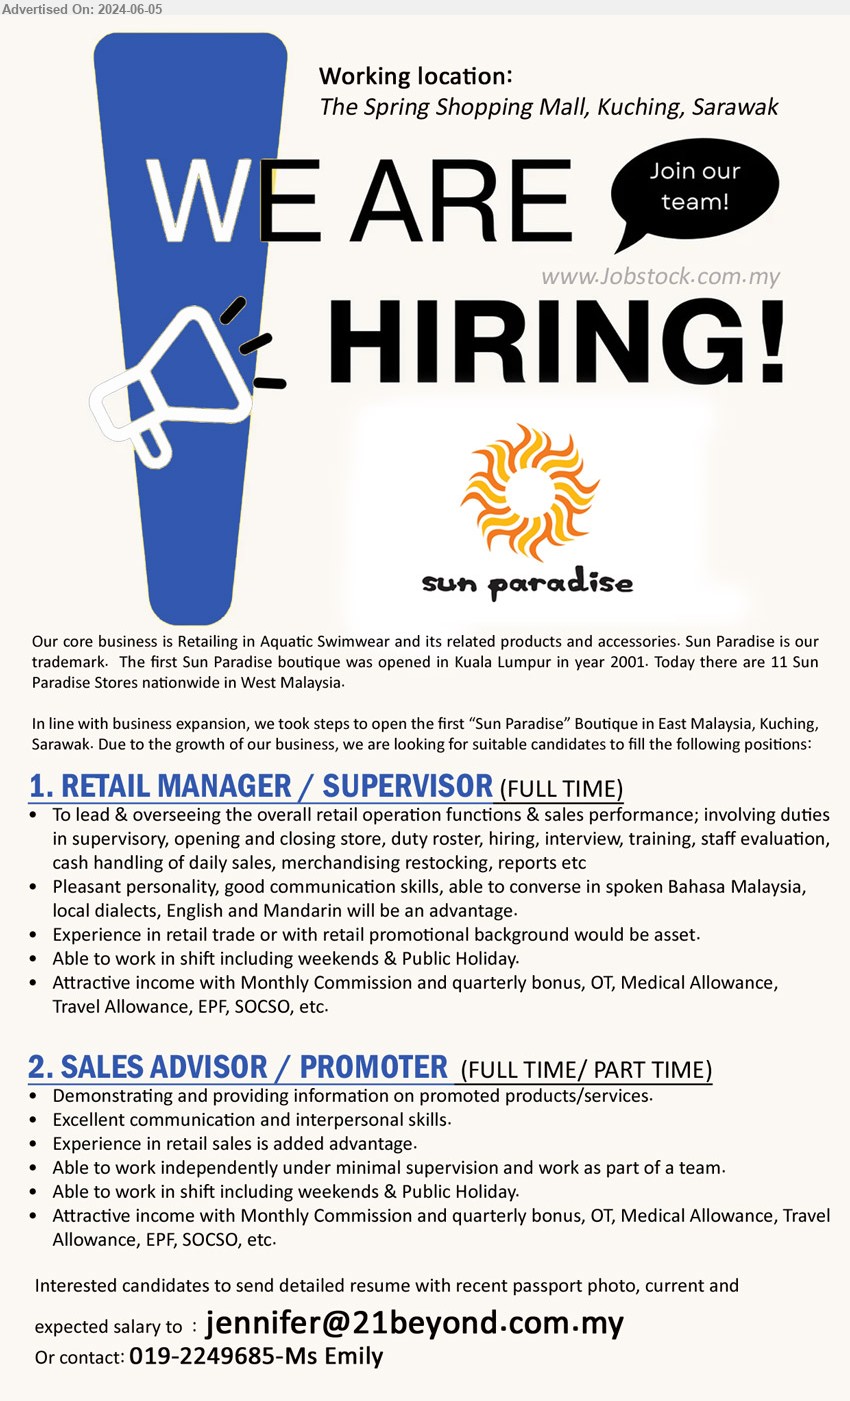 SUN PARADISE - 1. RETAIL MANAGER / SUPERVISOR (Kuching), Experience in retail trade or with retail promotional background would be asset,...
2. SALES ADVISOR / PROMOTER (Kuching), Experience in retail sales is added advantage,...
Contact 019-2249685 / Email resume to ....